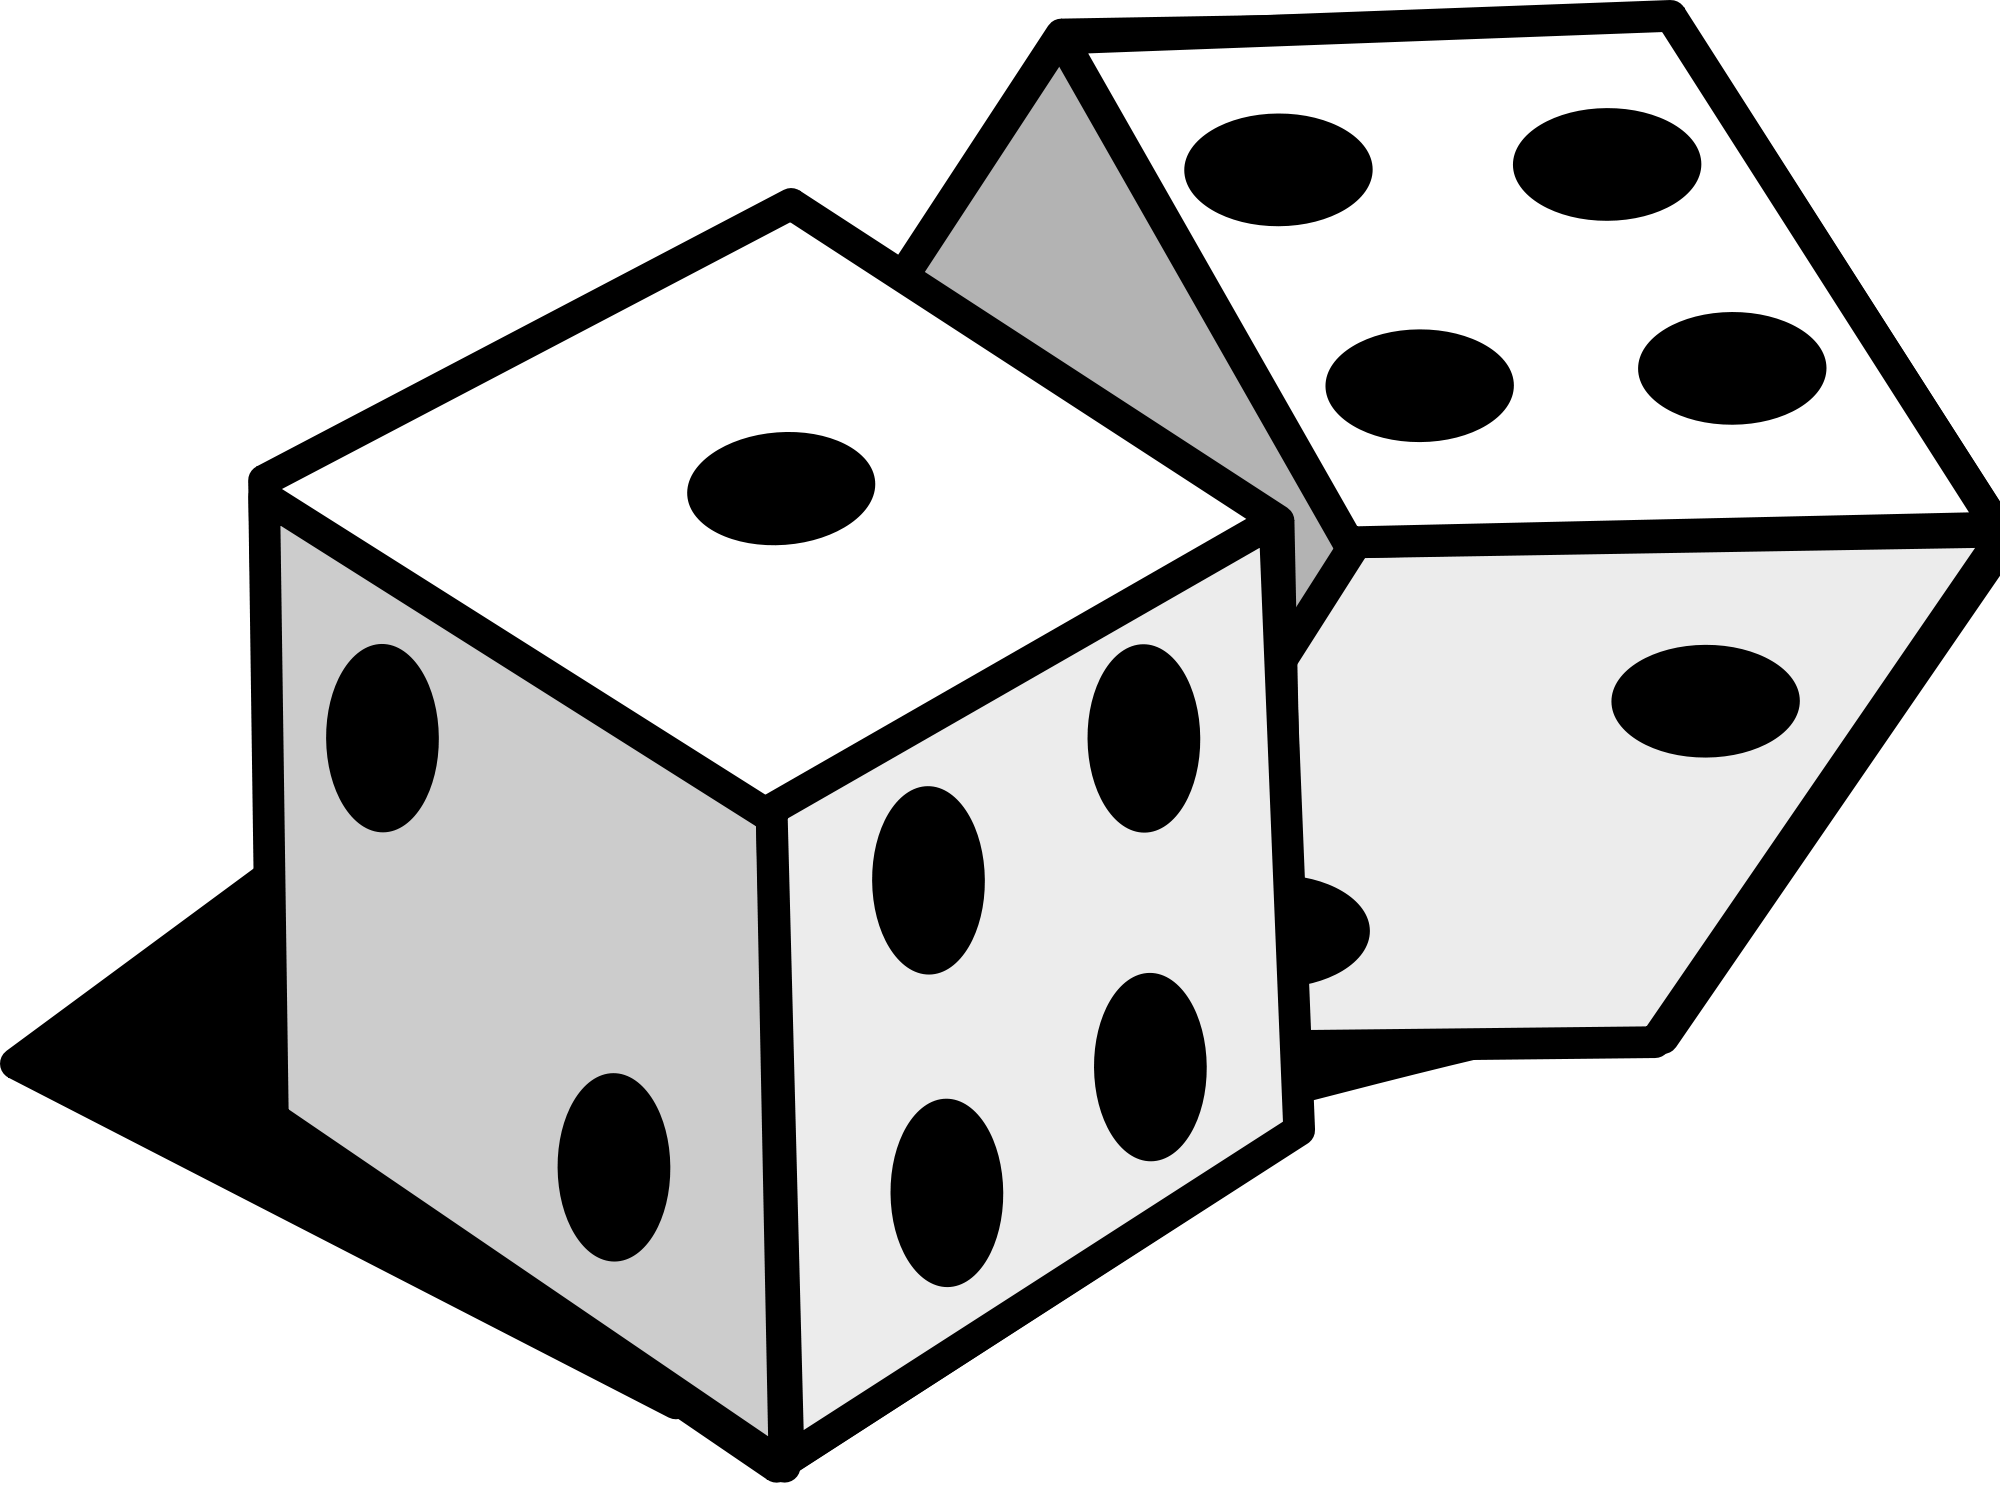 Two Dice